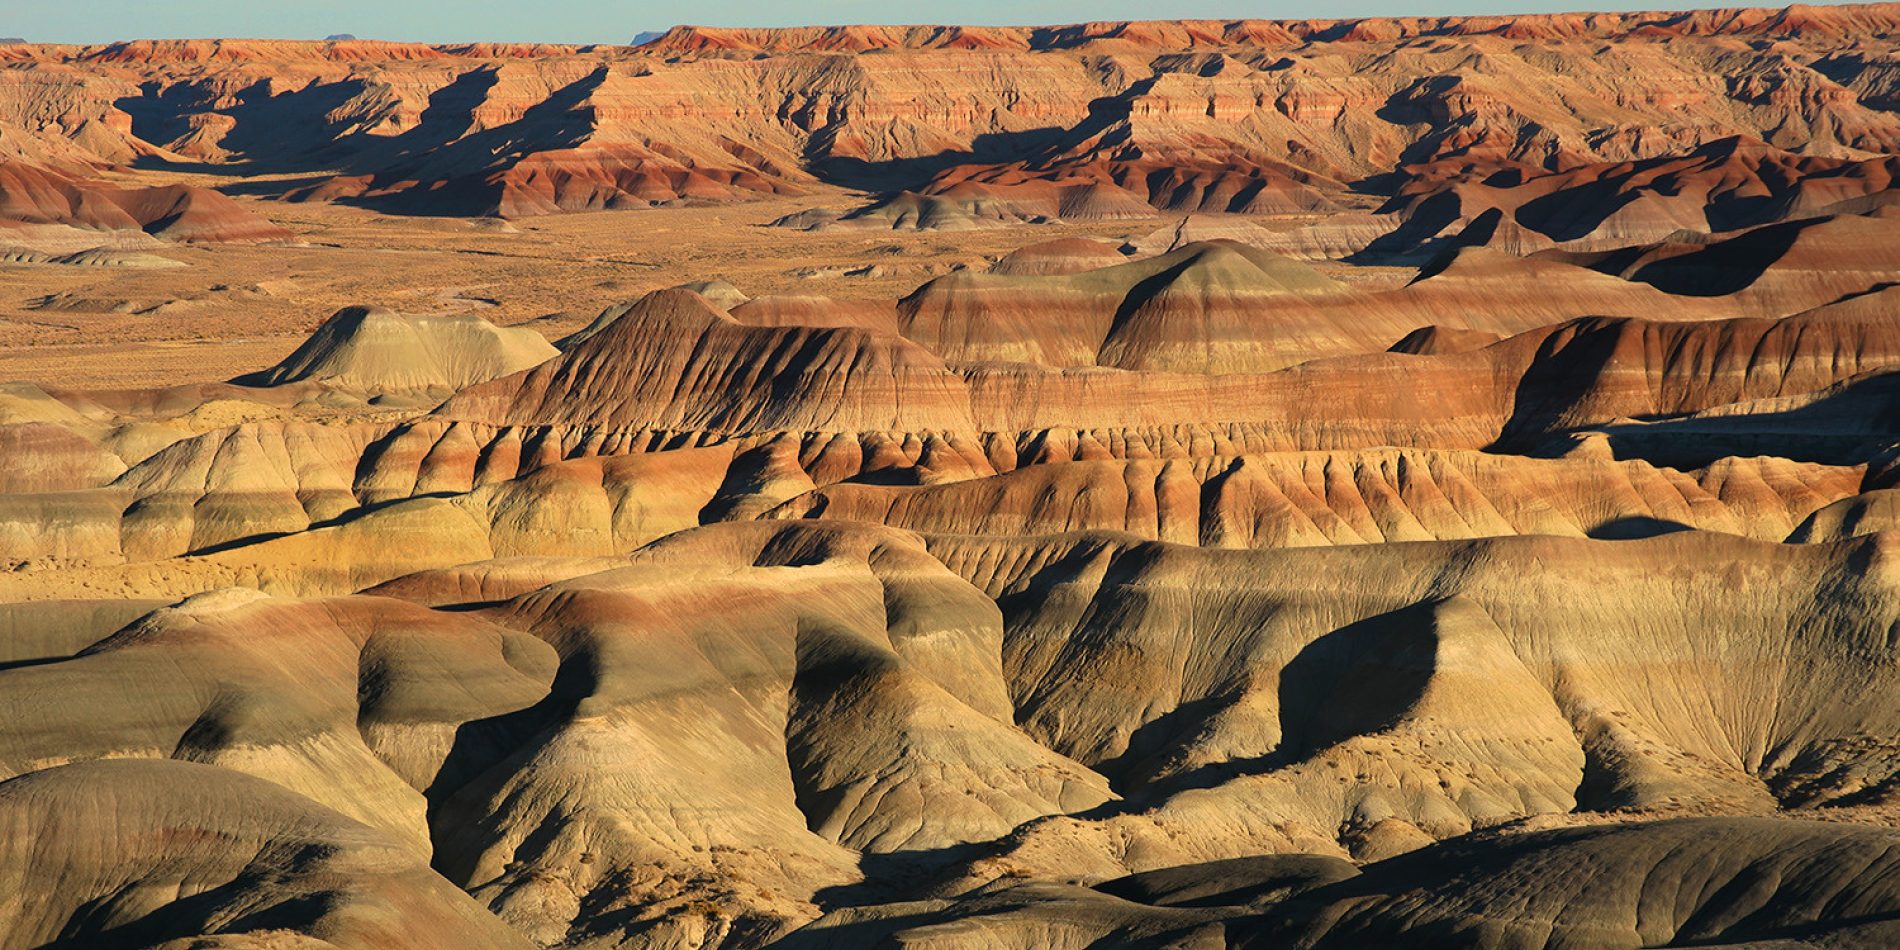 The Painted Desert (Location, Facts & Visitor's Guide)